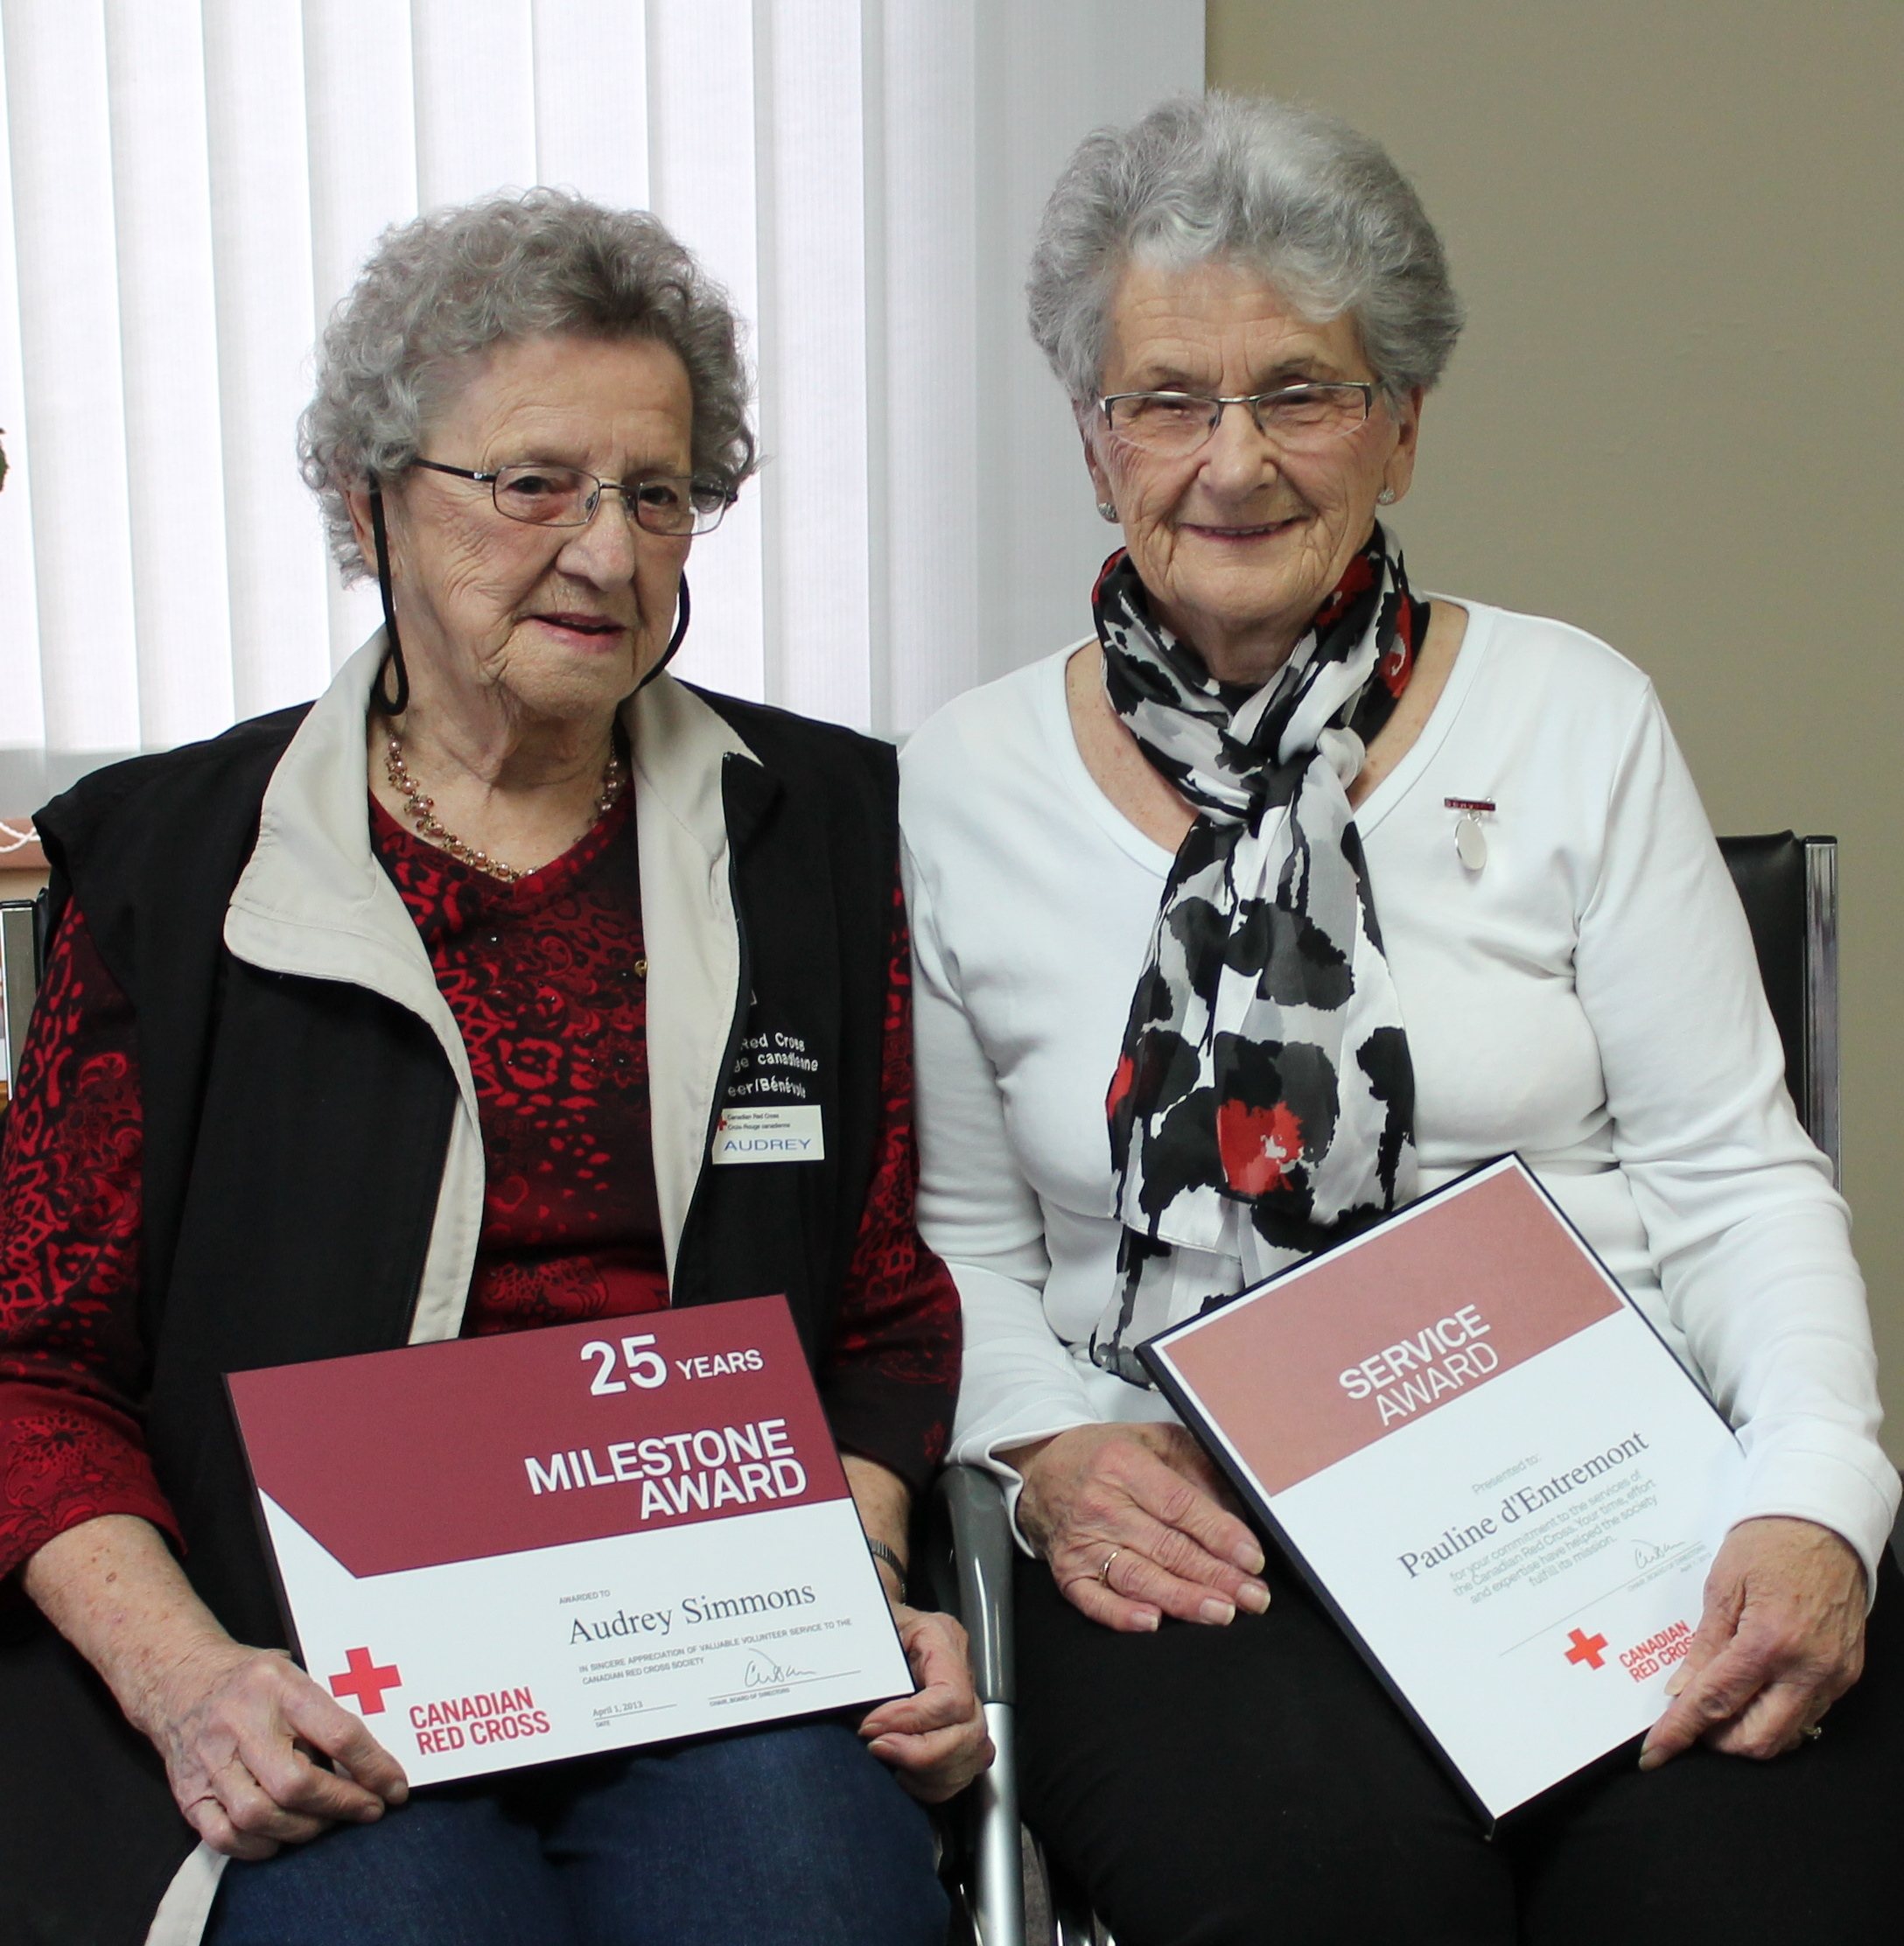 Yarmouth Service Award recipients Audrey Simmons for 25 years of service and Pauline d’Entremont for 29 years of service. 